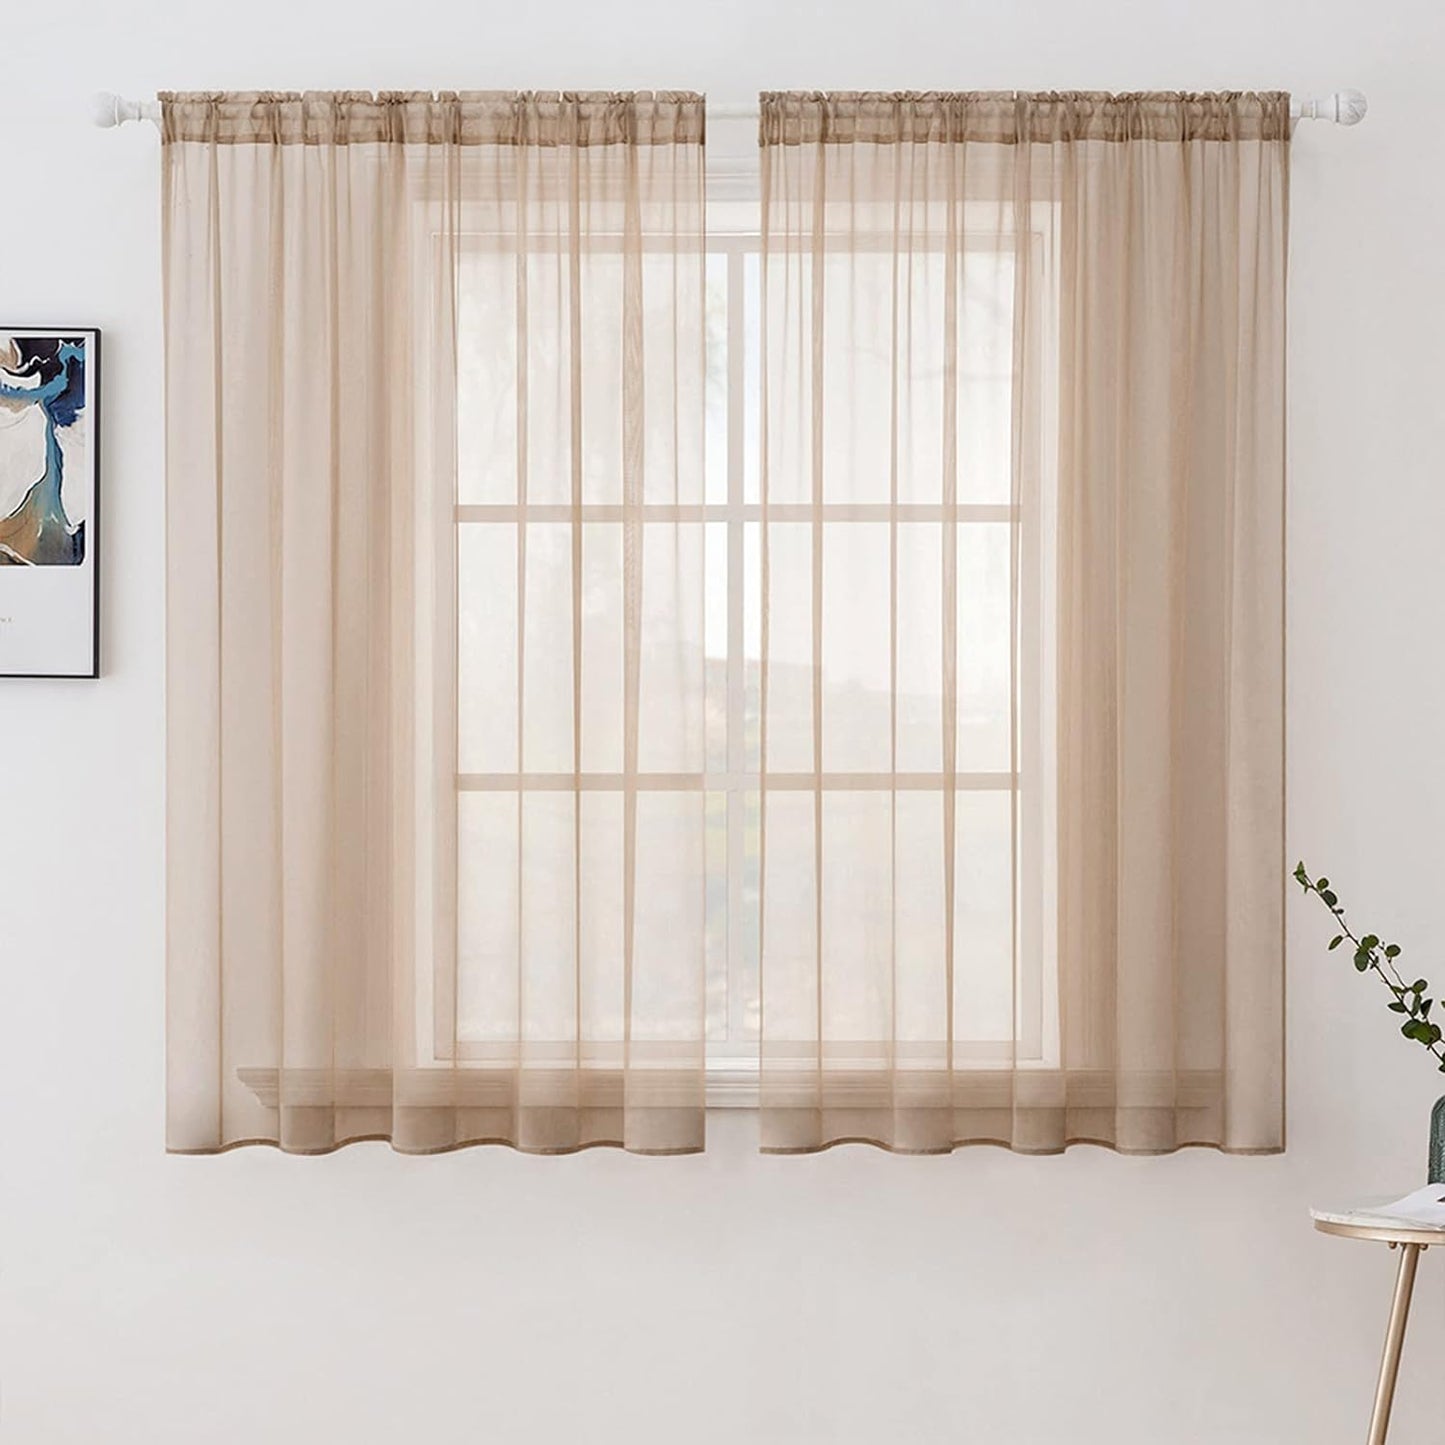 MIULEE White Sheer Curtains 96 Inches Long Window Curtains 2 Panels Solid Color Elegant Window Voile Panels/Drapes/Treatment for Bedroom Living Room (54 X 96 Inches White)  MIULEE Brown 54''W X 54''L 